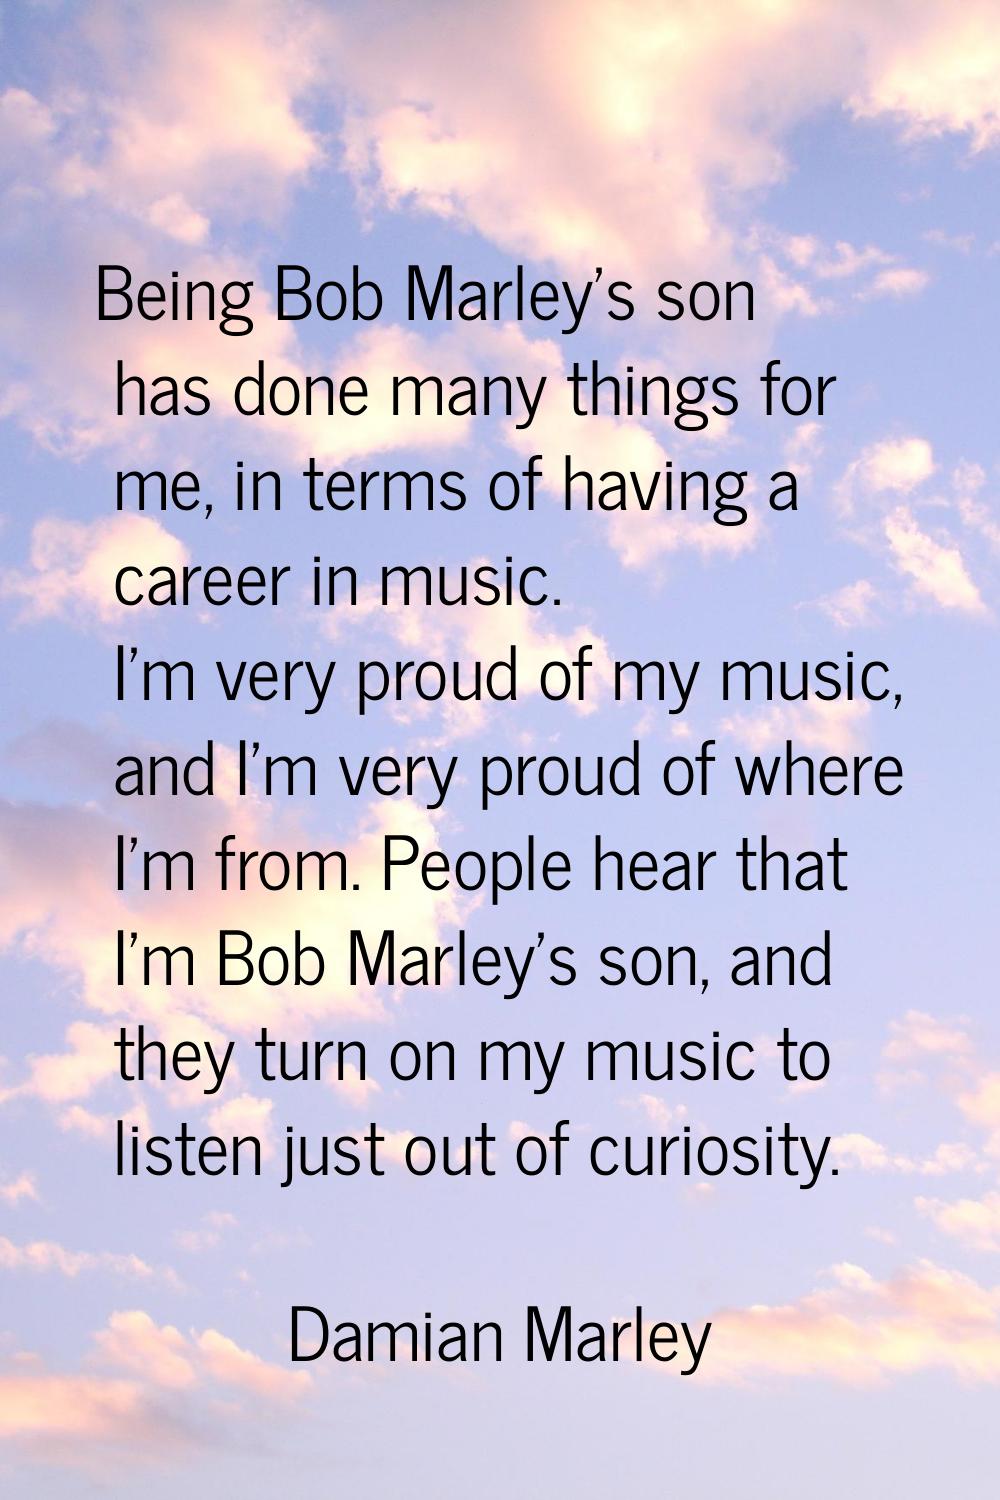 Being Bob Marley's son has done many things for me, in terms of having a career in music. I'm very 